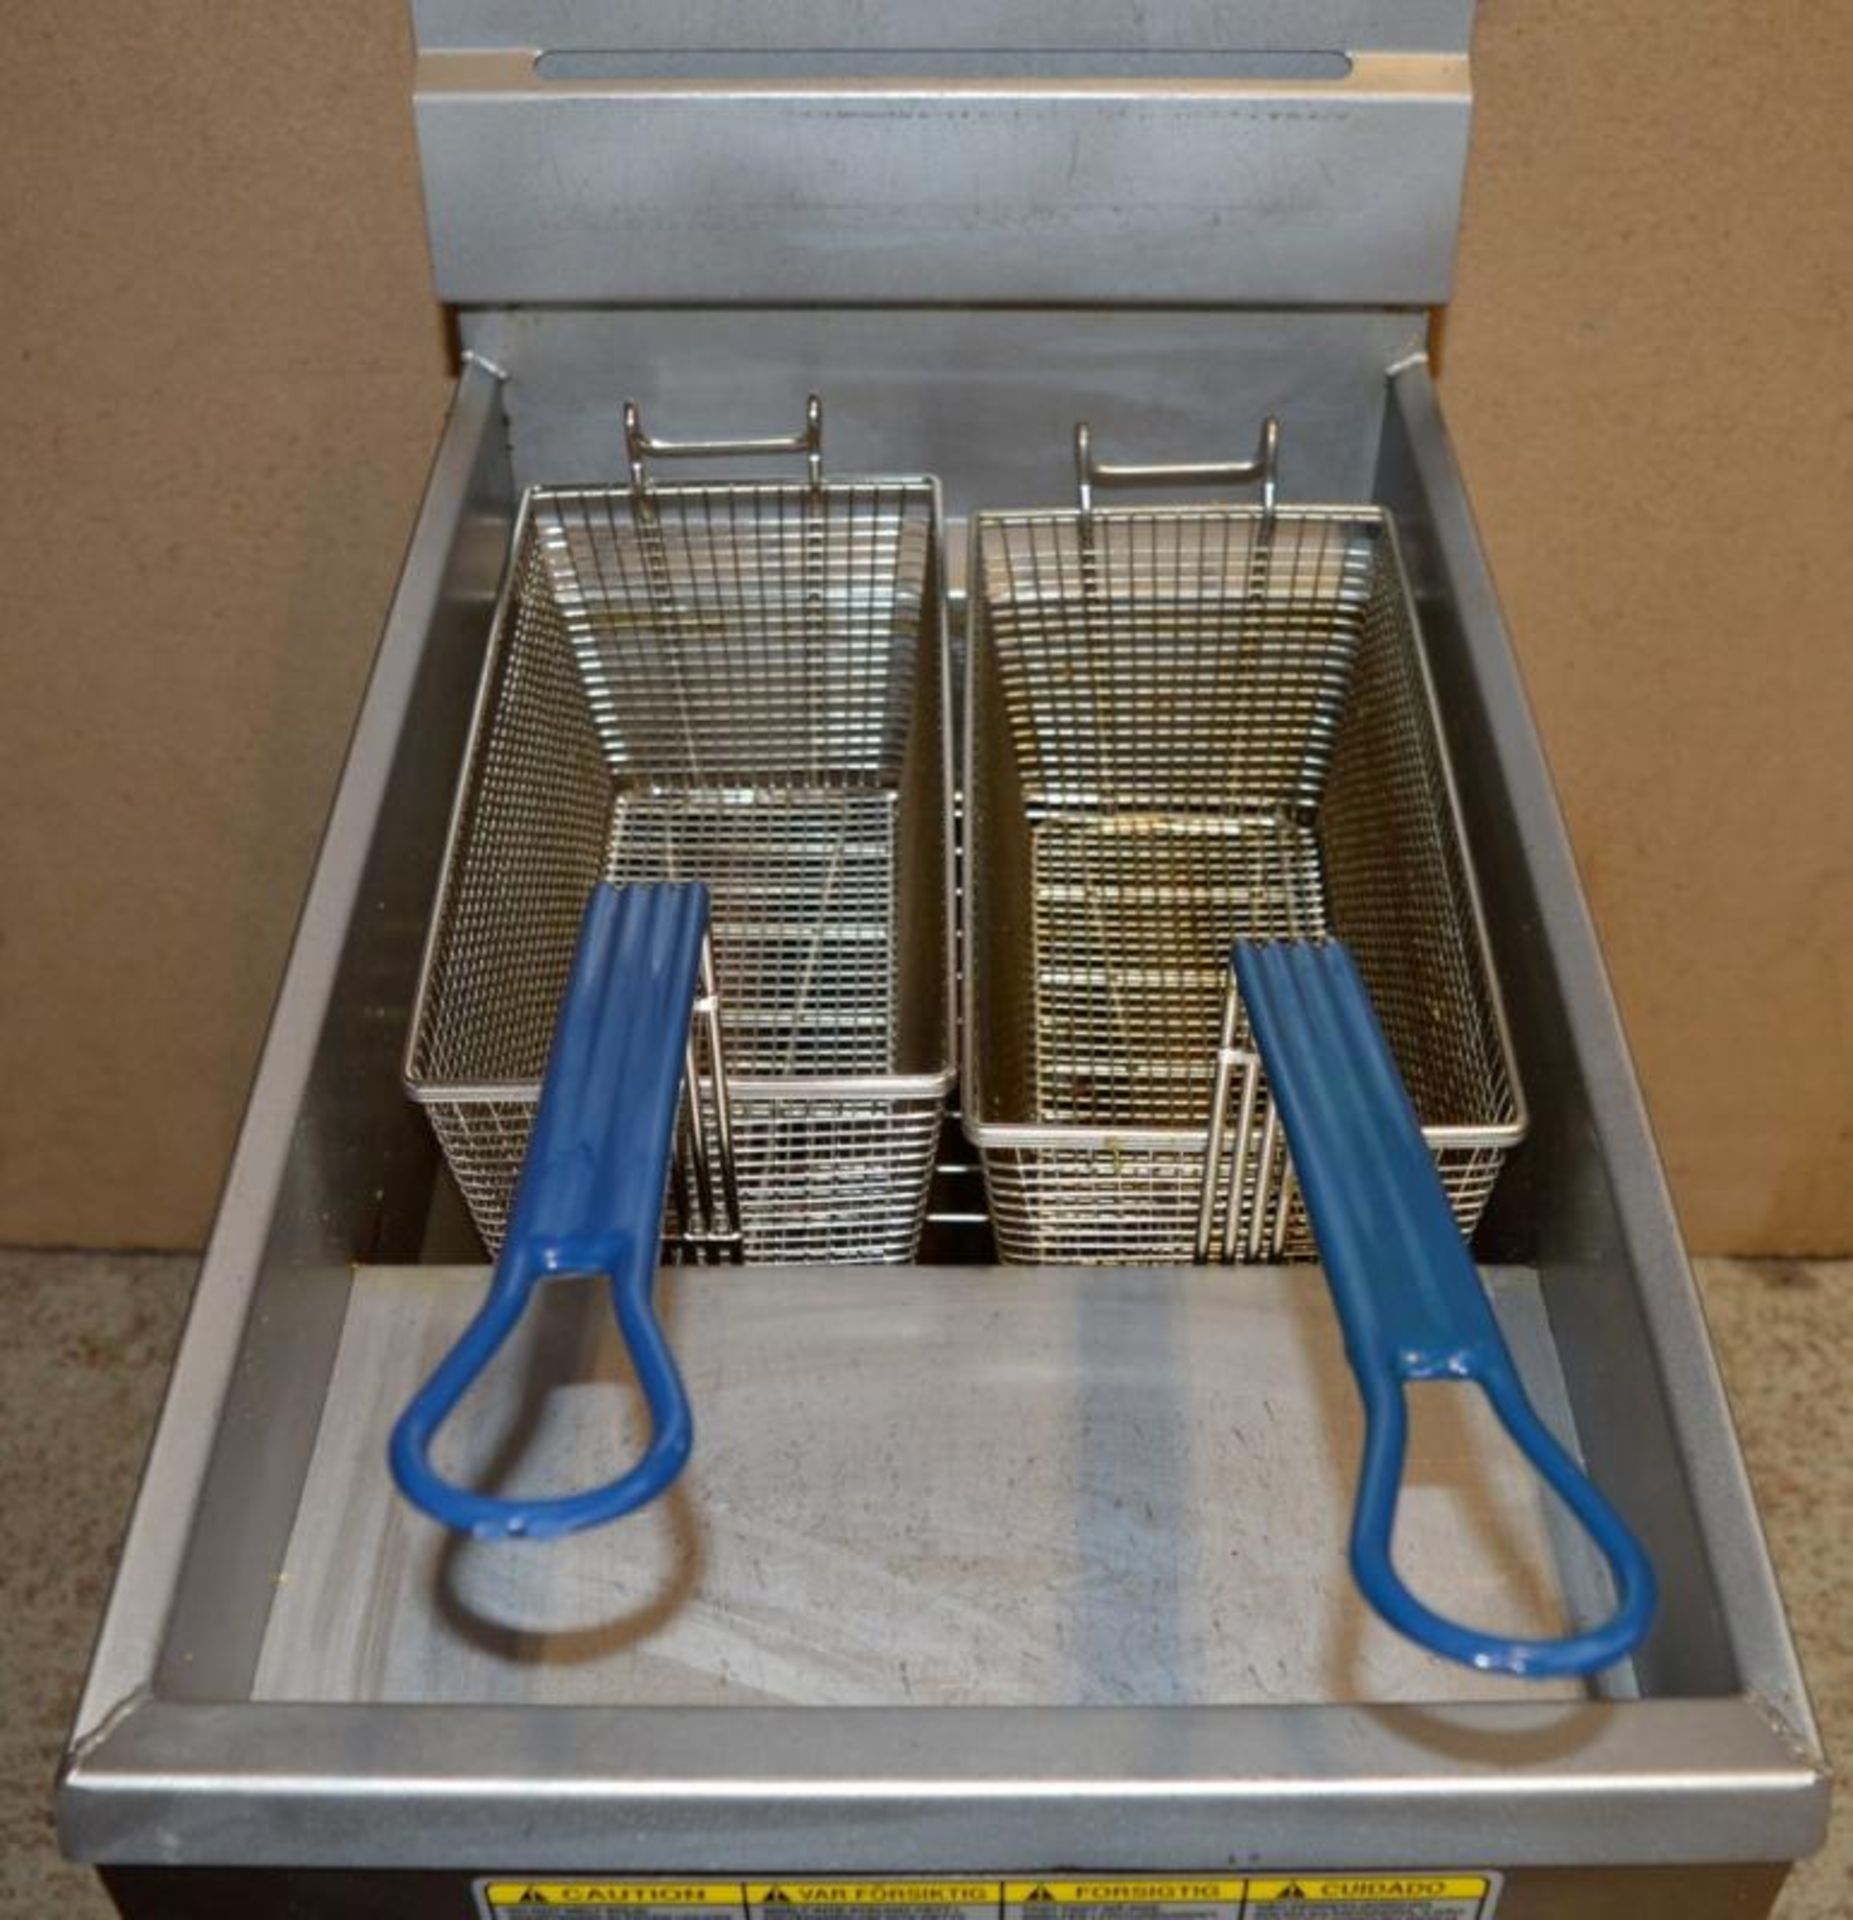 1 x Pitco Natural Gas Twin Basket Deep Fryer - Purchased New 30/11/2017 - Model 35C+ - Stainless Ste - Image 6 of 11